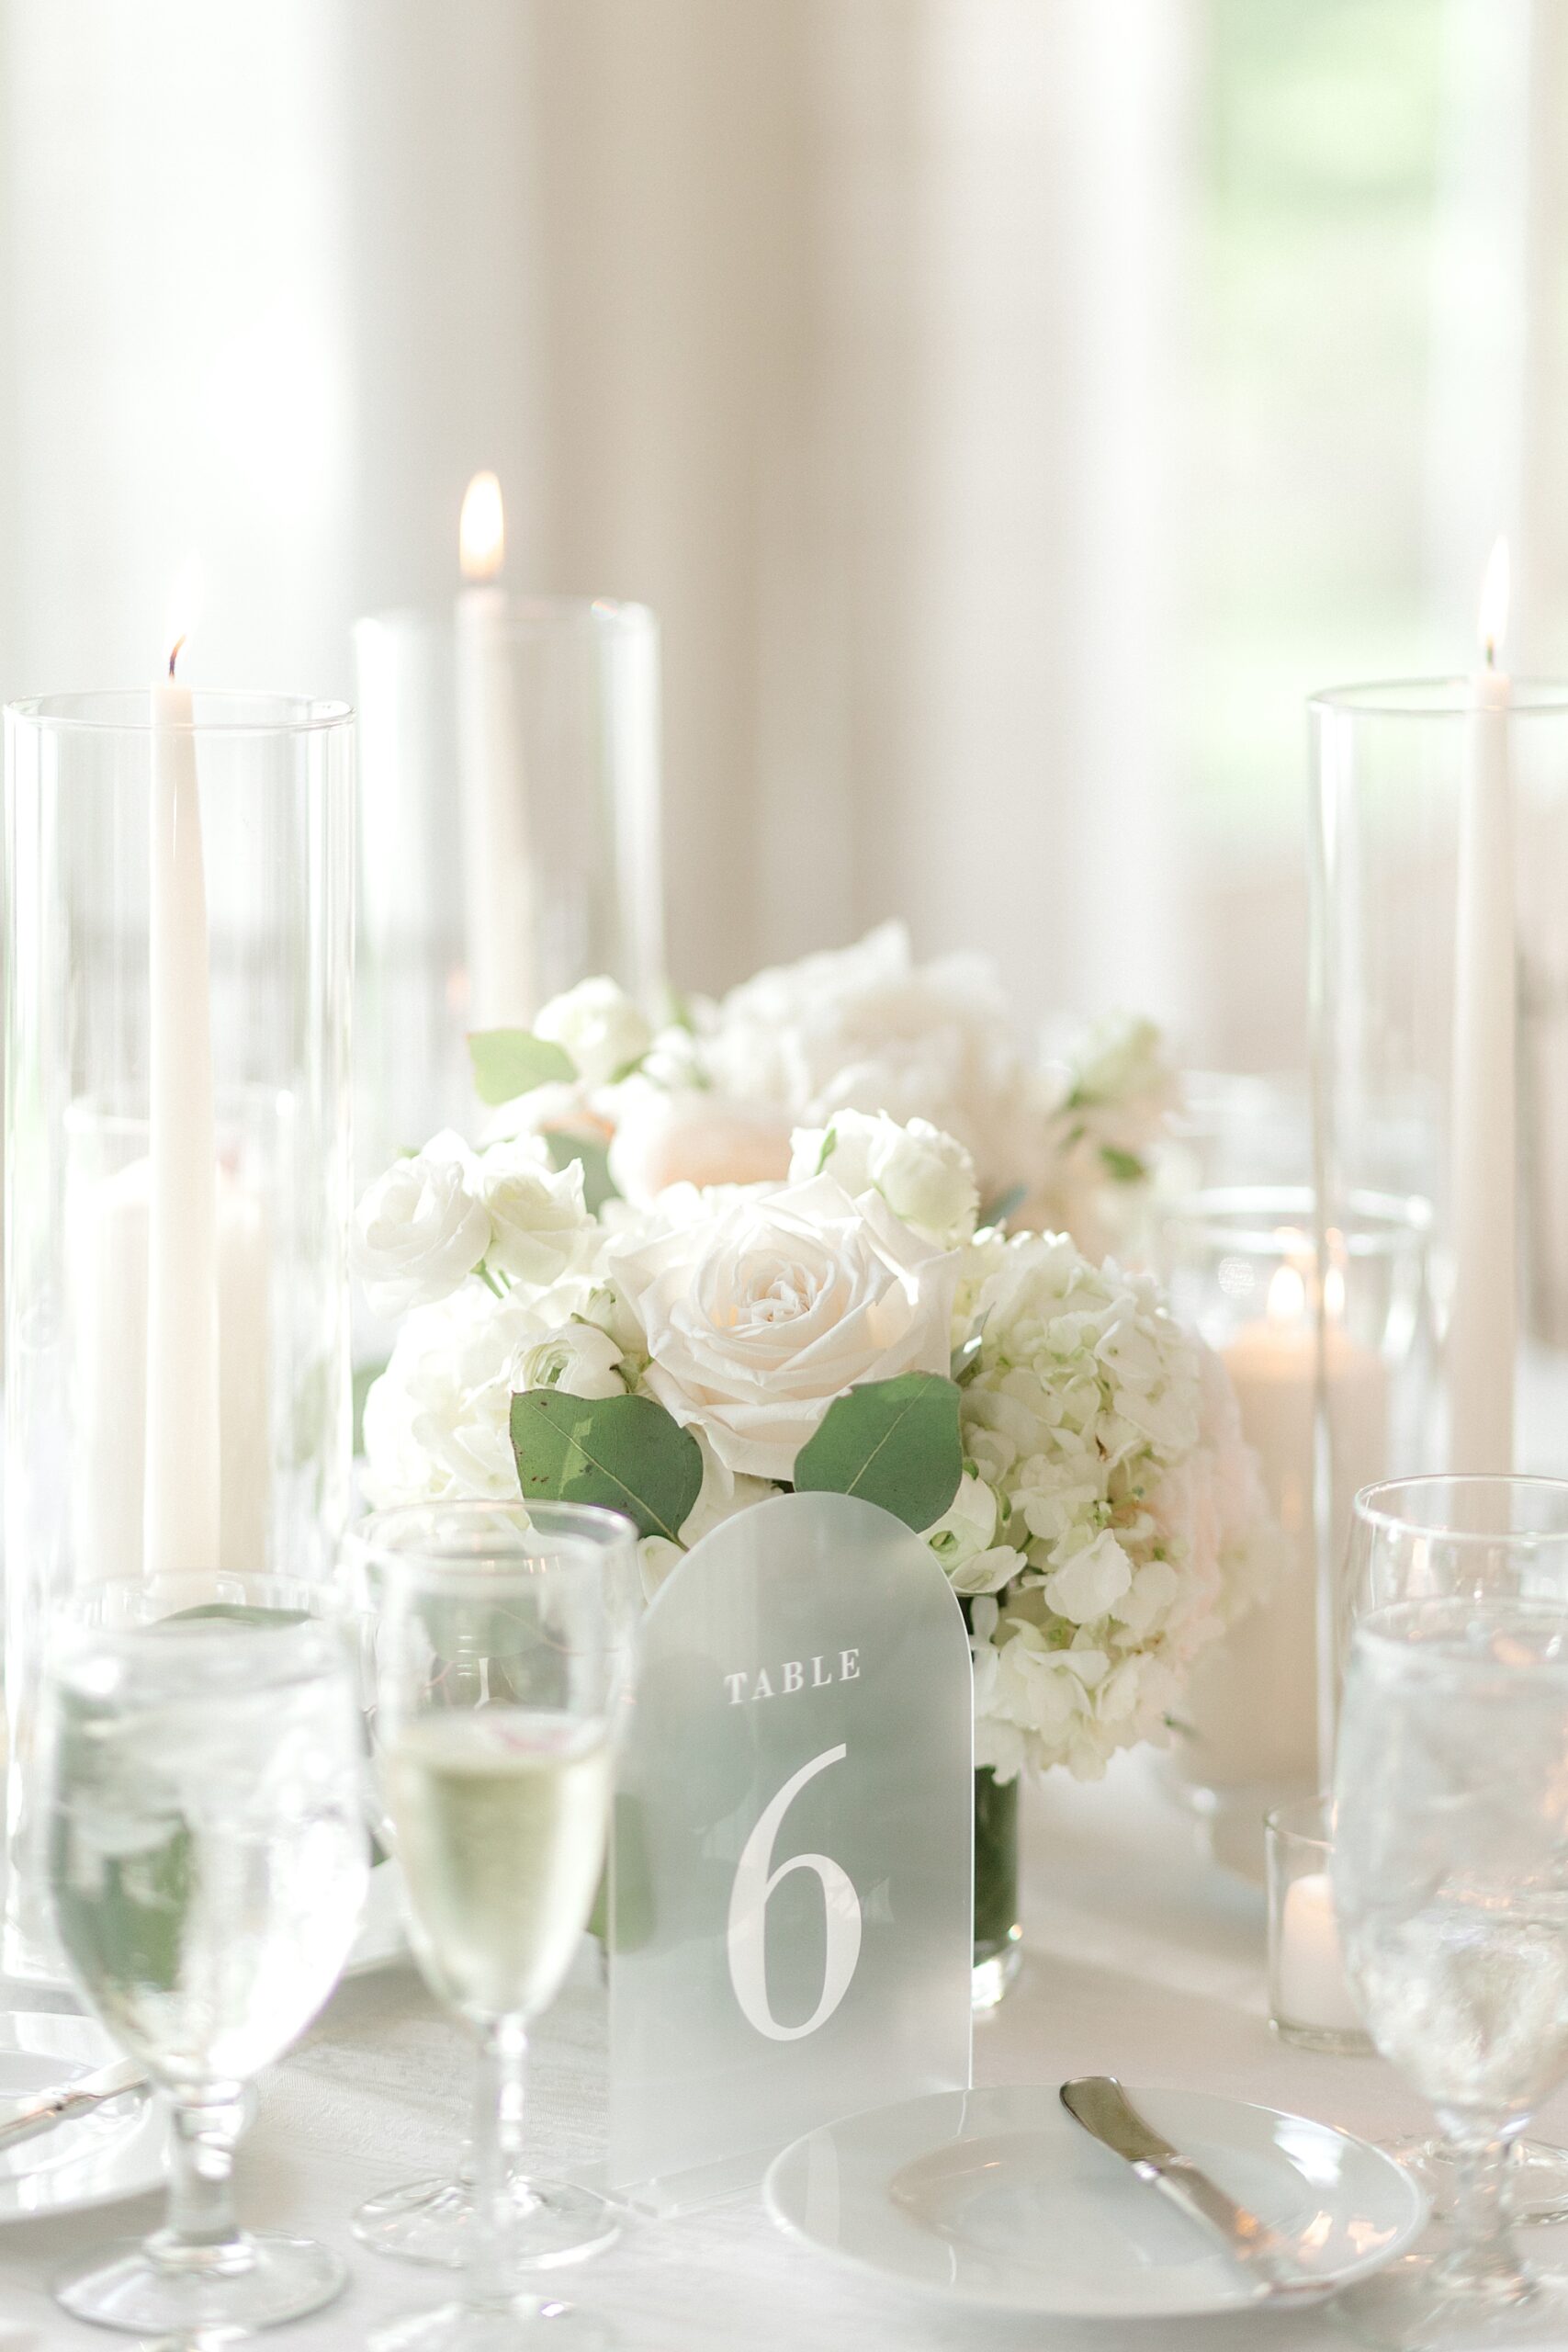 centerpieces with acrylic table numbers, tall thin white candles and white flowers